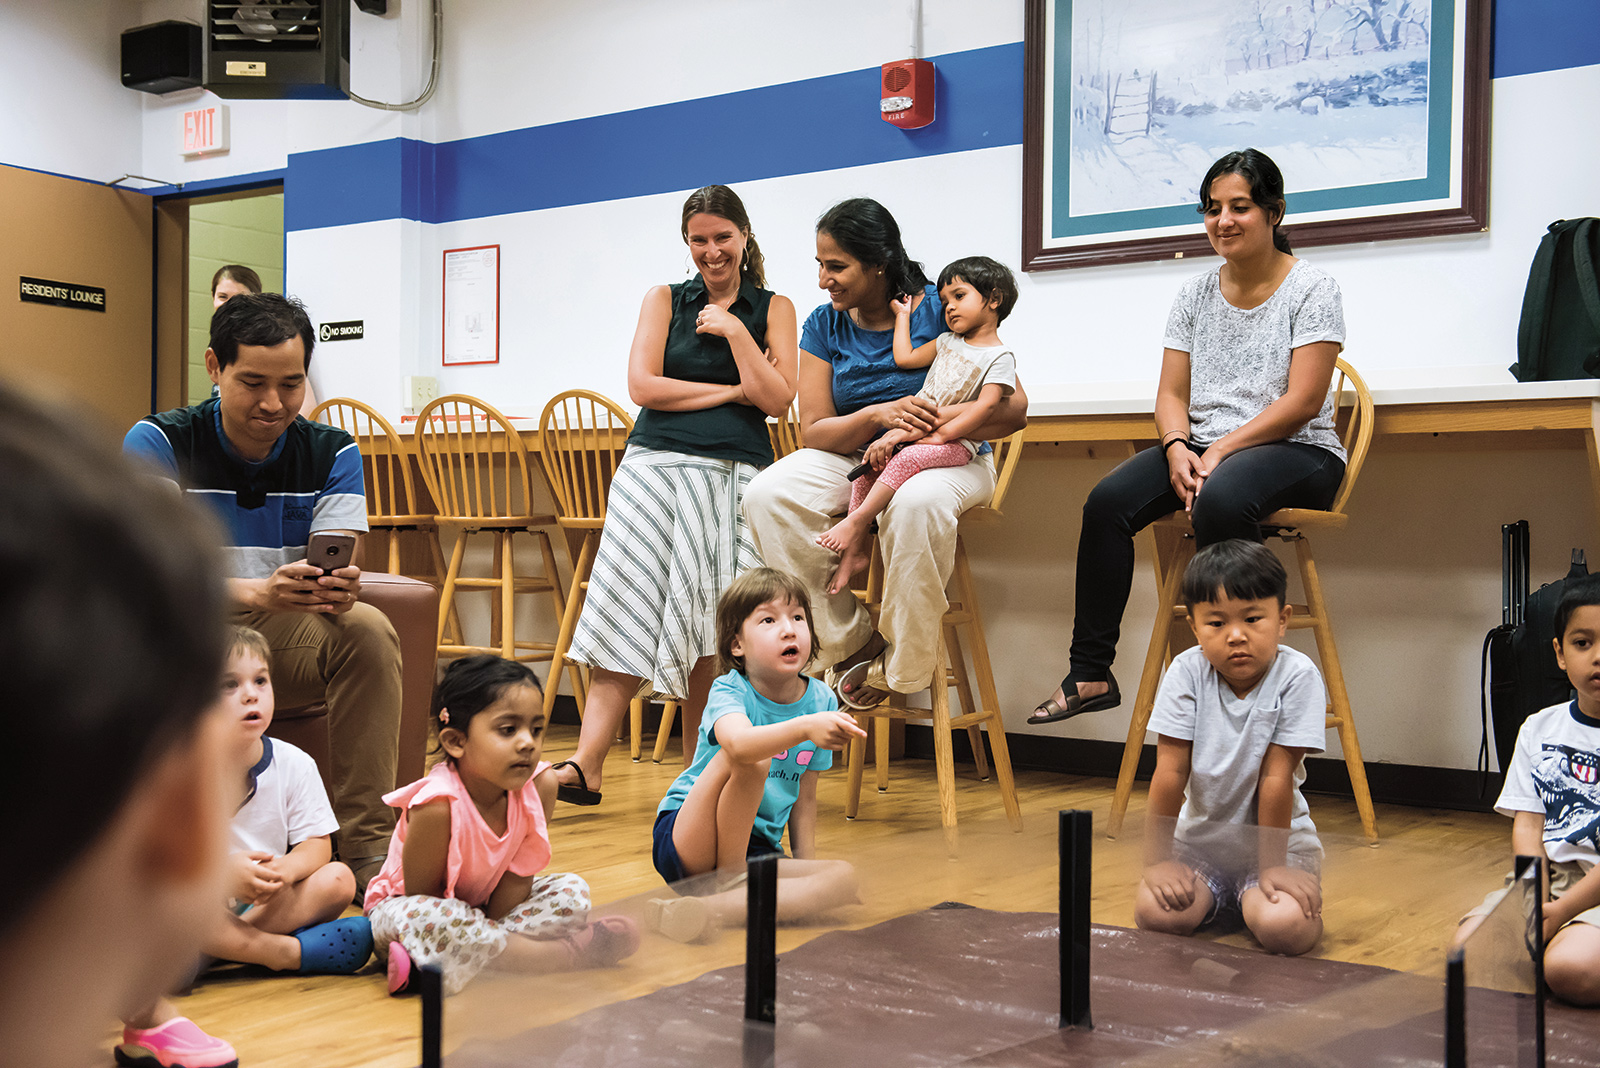 Two women, one holding a small child, look upon a group of small children sitting on the floor